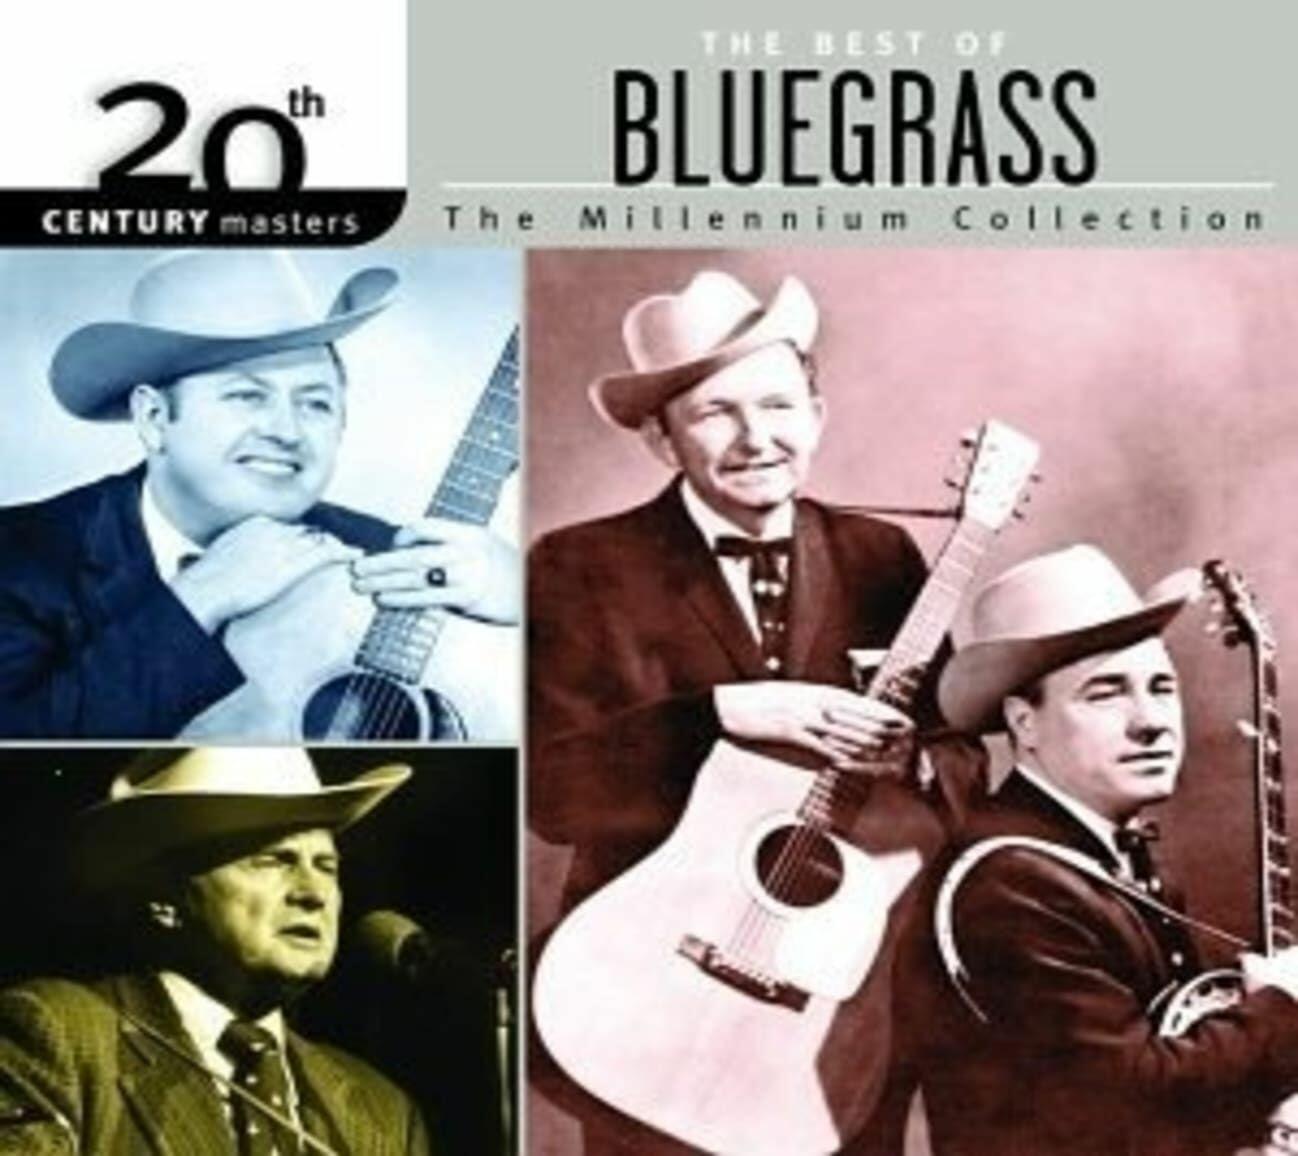 The Best of Bluegrass: Millennium Collection – 20th Century Masters (CD) on MovieShack